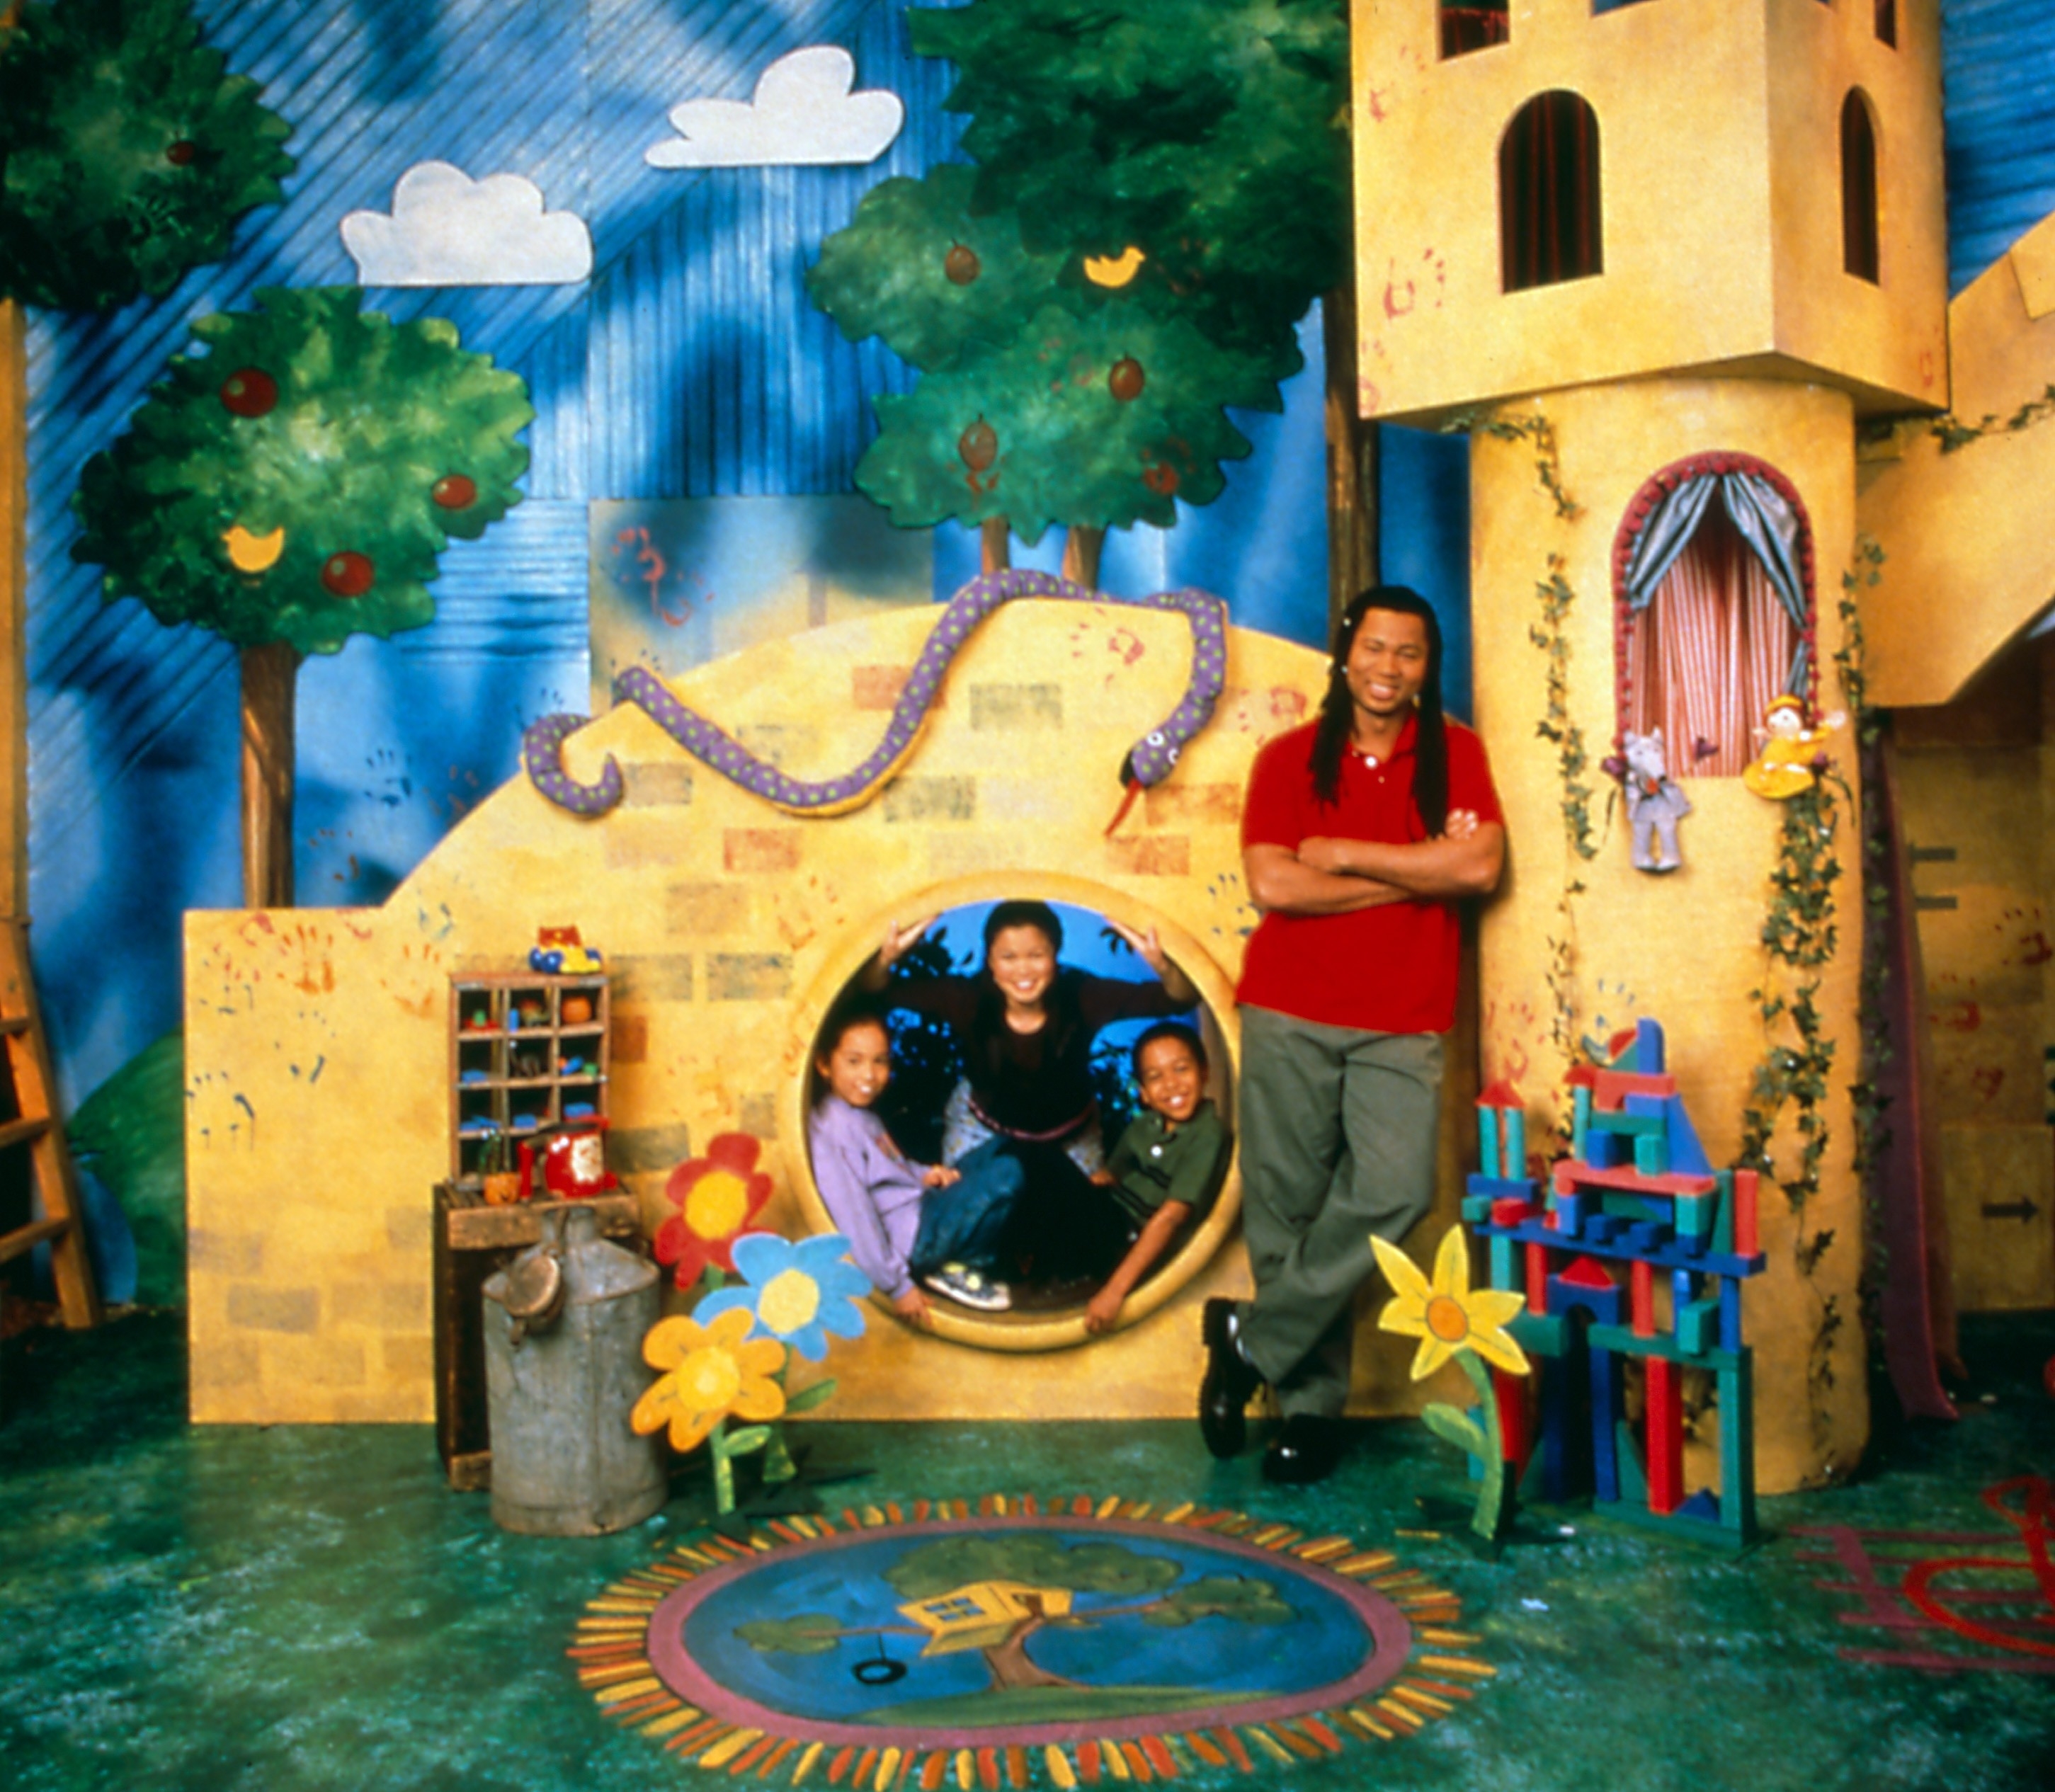 A scene from a children&#x27;s TV show with characters posing in a playful, colorful indoor set designed to look like a storybook village